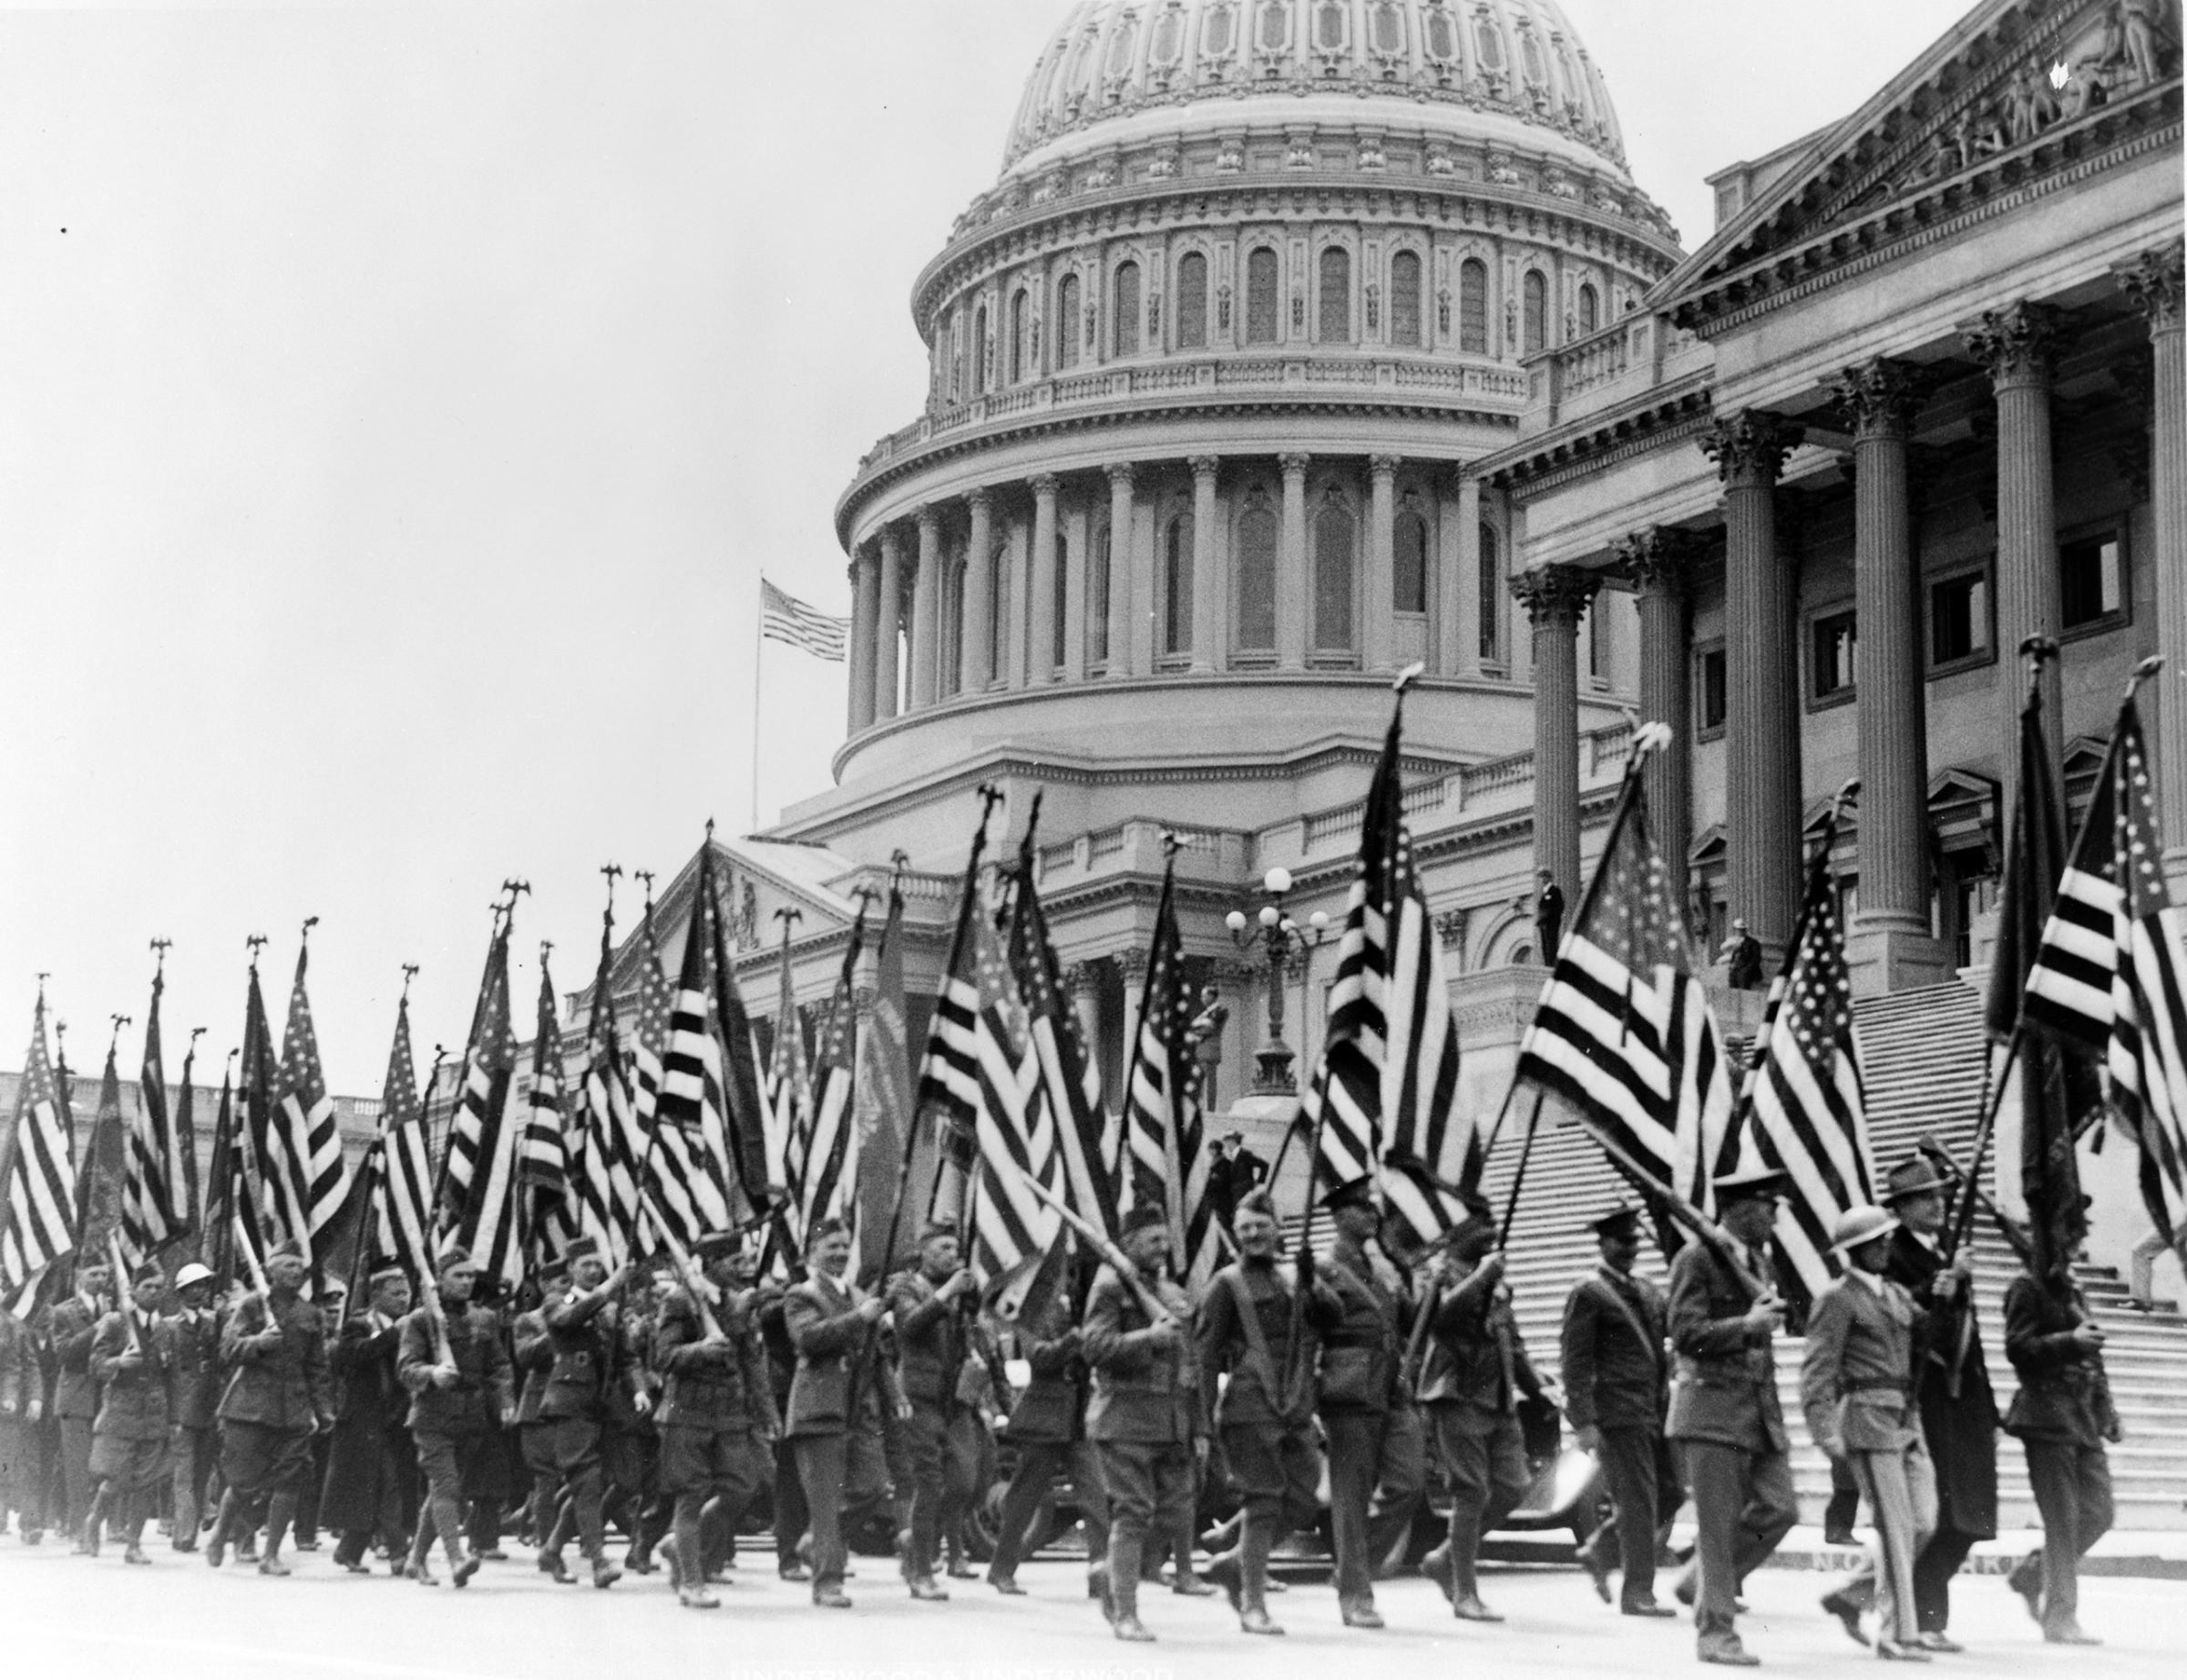 Members of the Bonus Expeditionary Forces, many carrying American flags, marching across the east plaza of the U.S. Capitol. April 8, 1932.